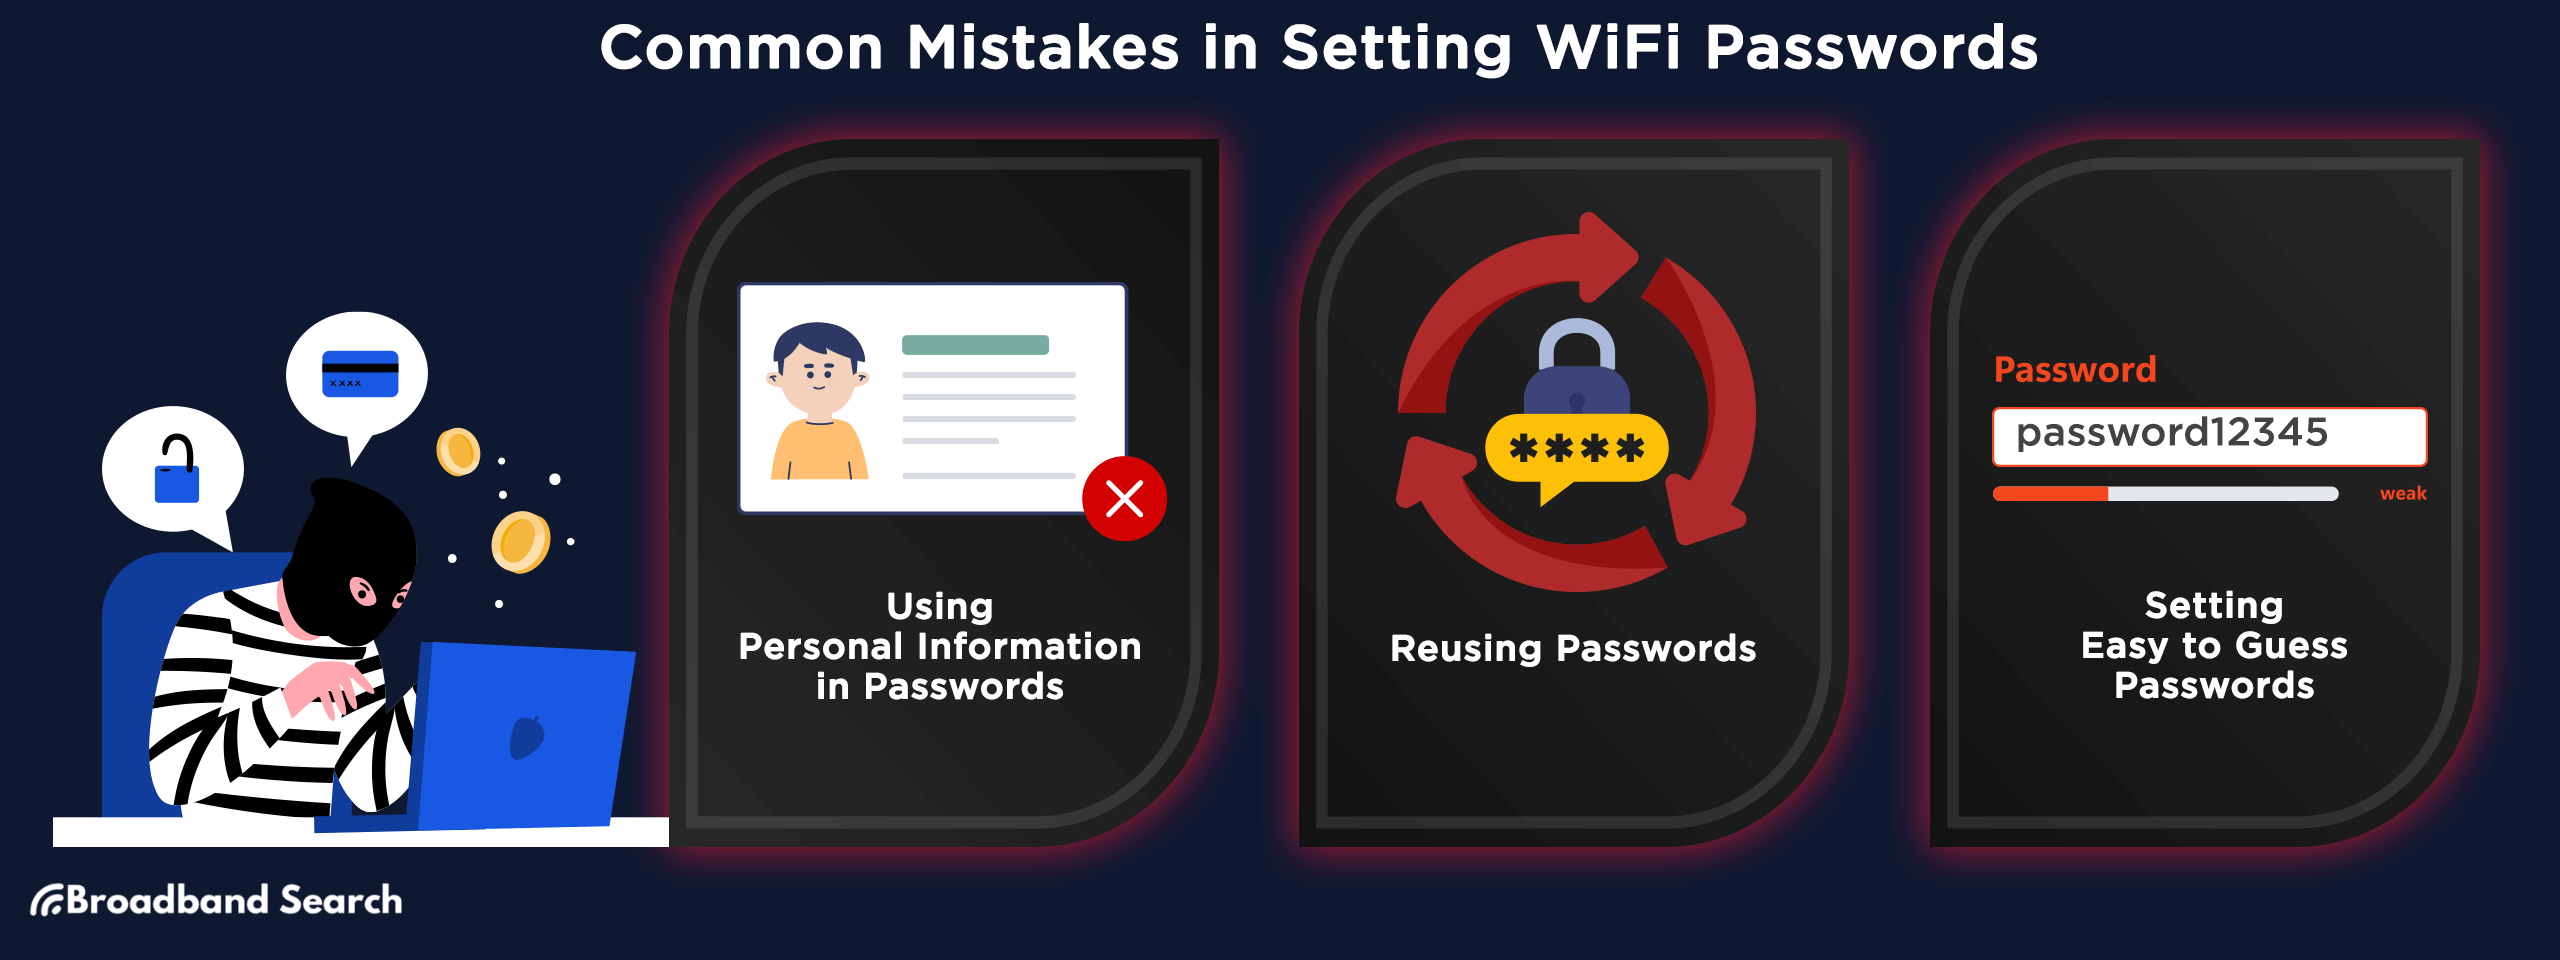 Common Mistakes in Setting WiFi Passwords